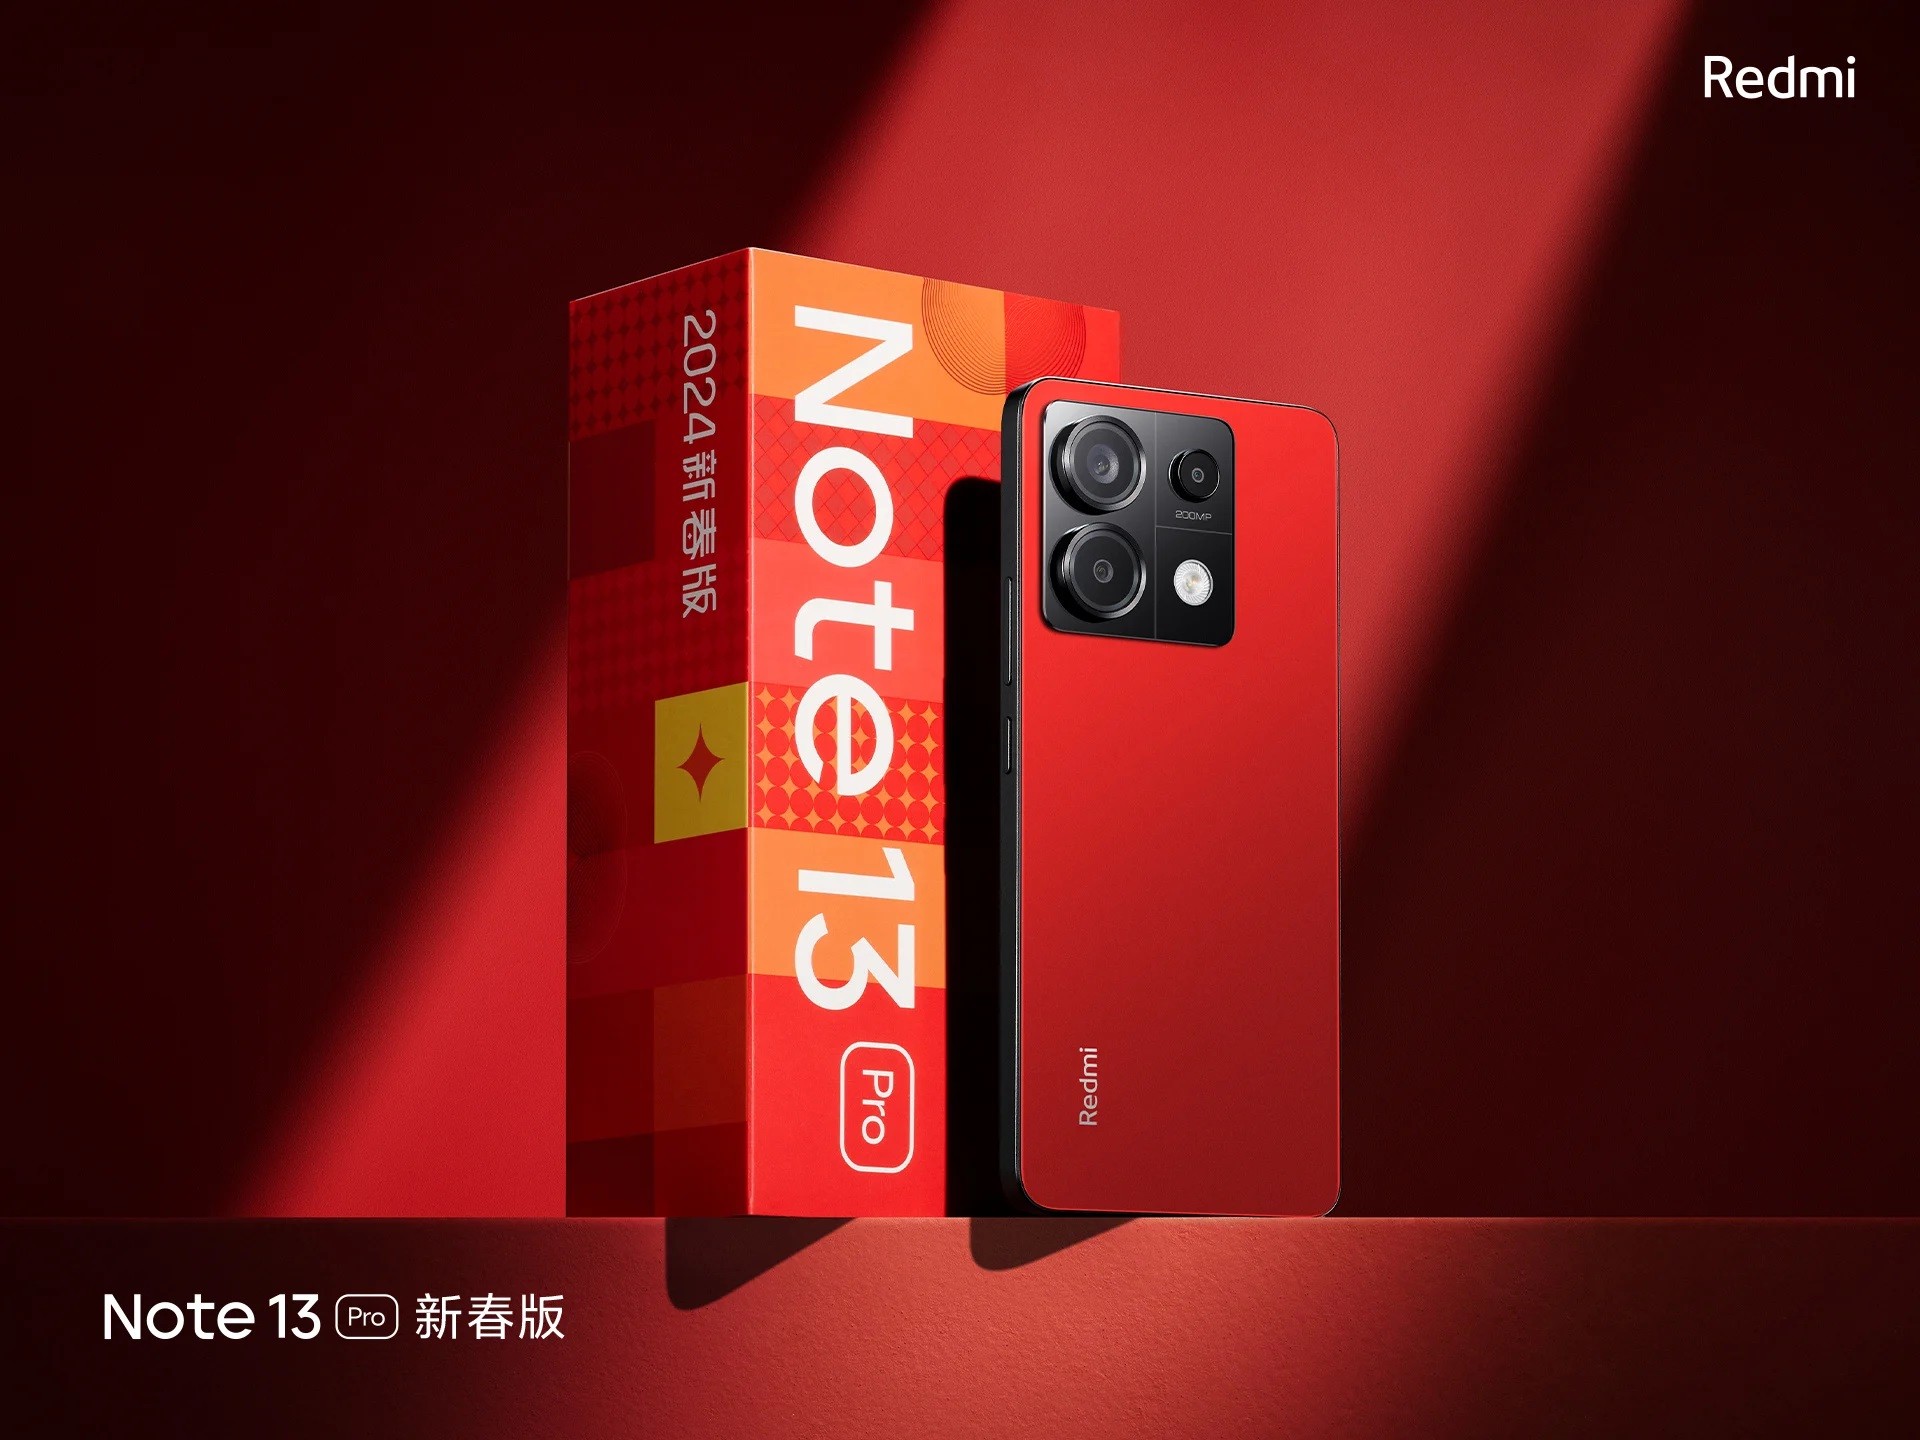 redmi-note-13-pro-new-year-special-2-1706171552.jpg